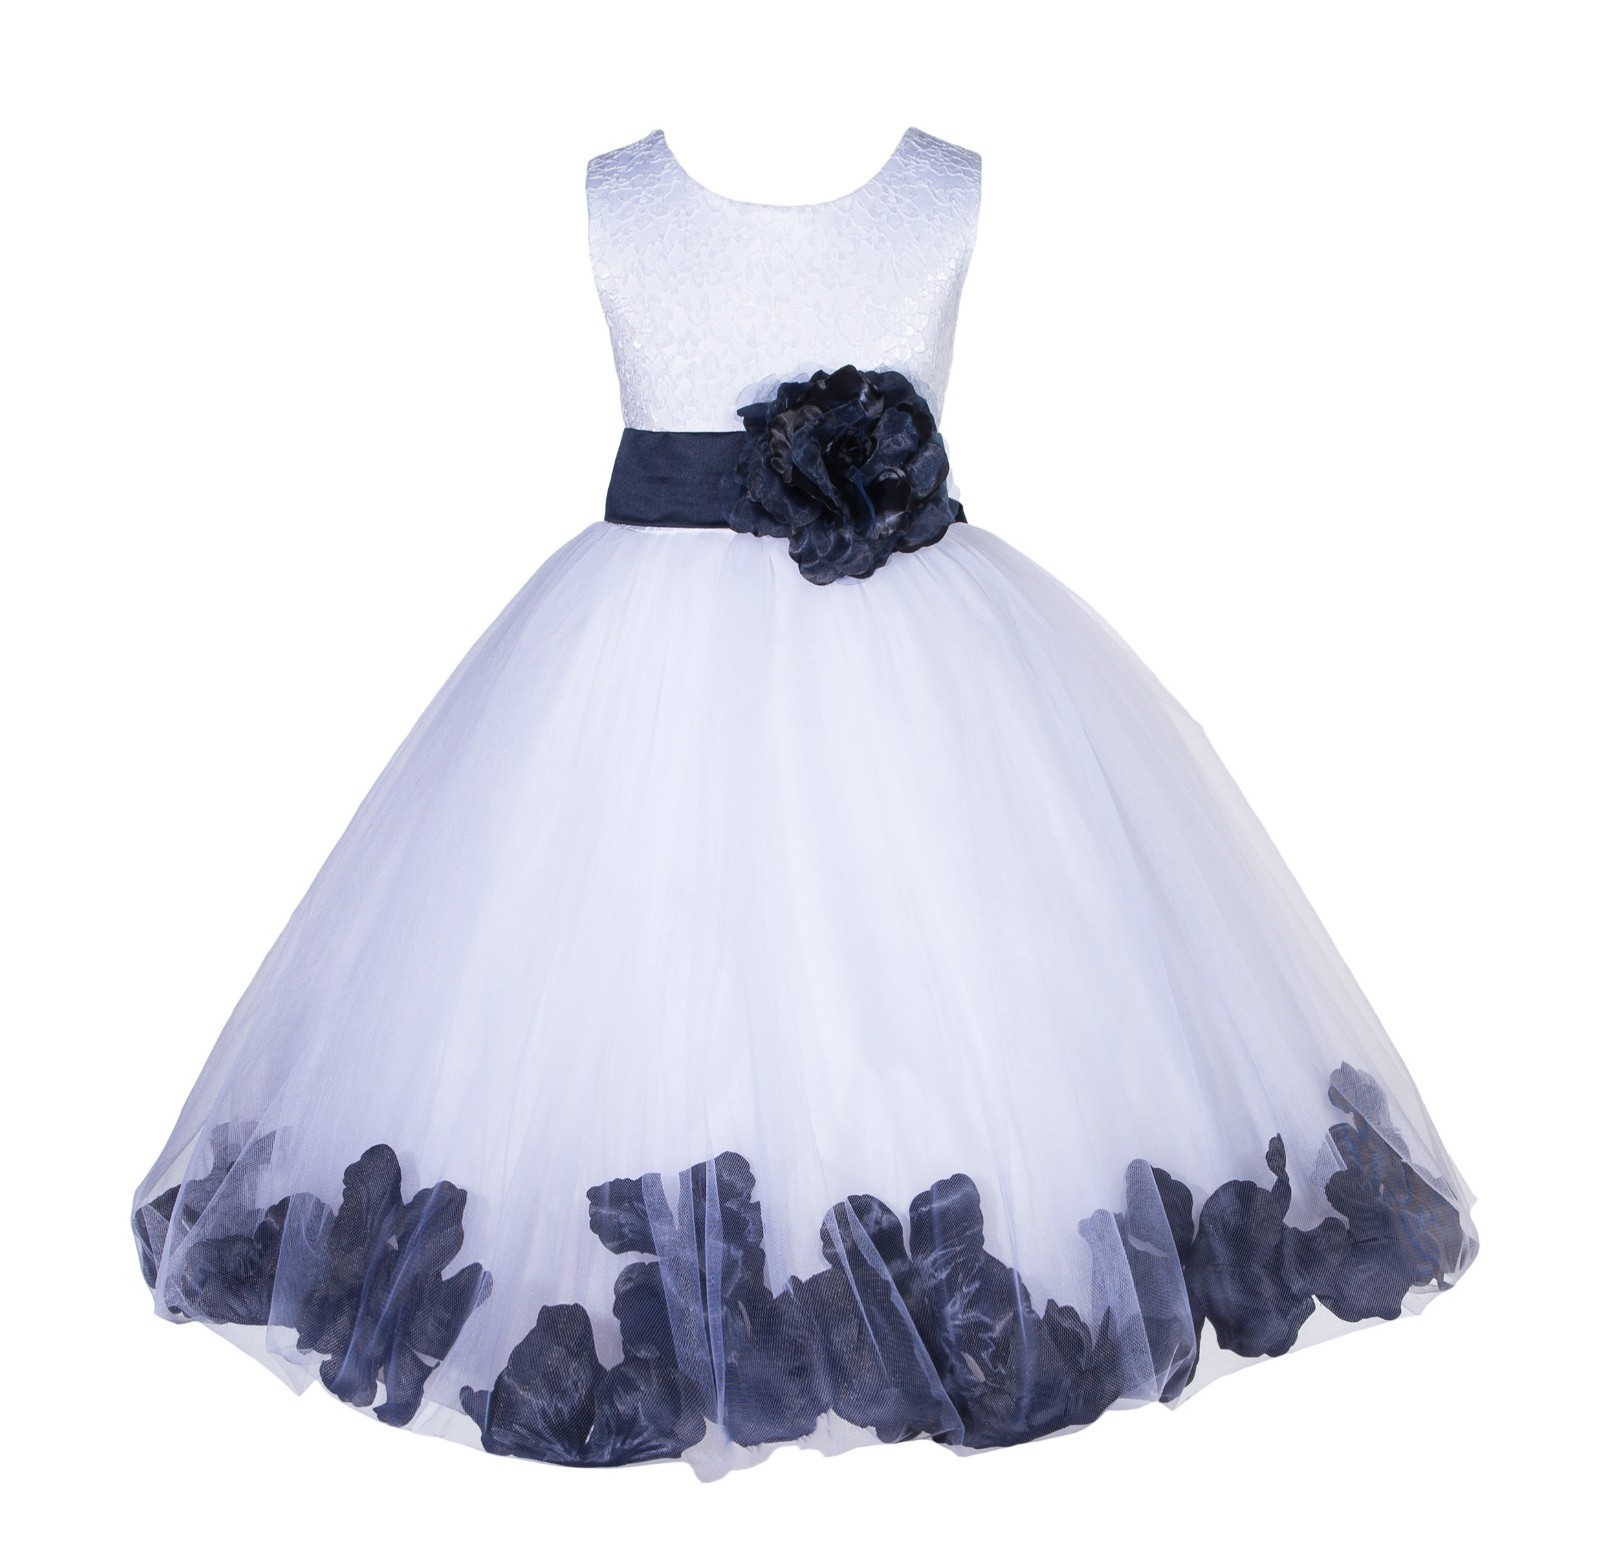 White/Midnight Lace Top Tulle Floral Petals Flower Girl Dress 165S